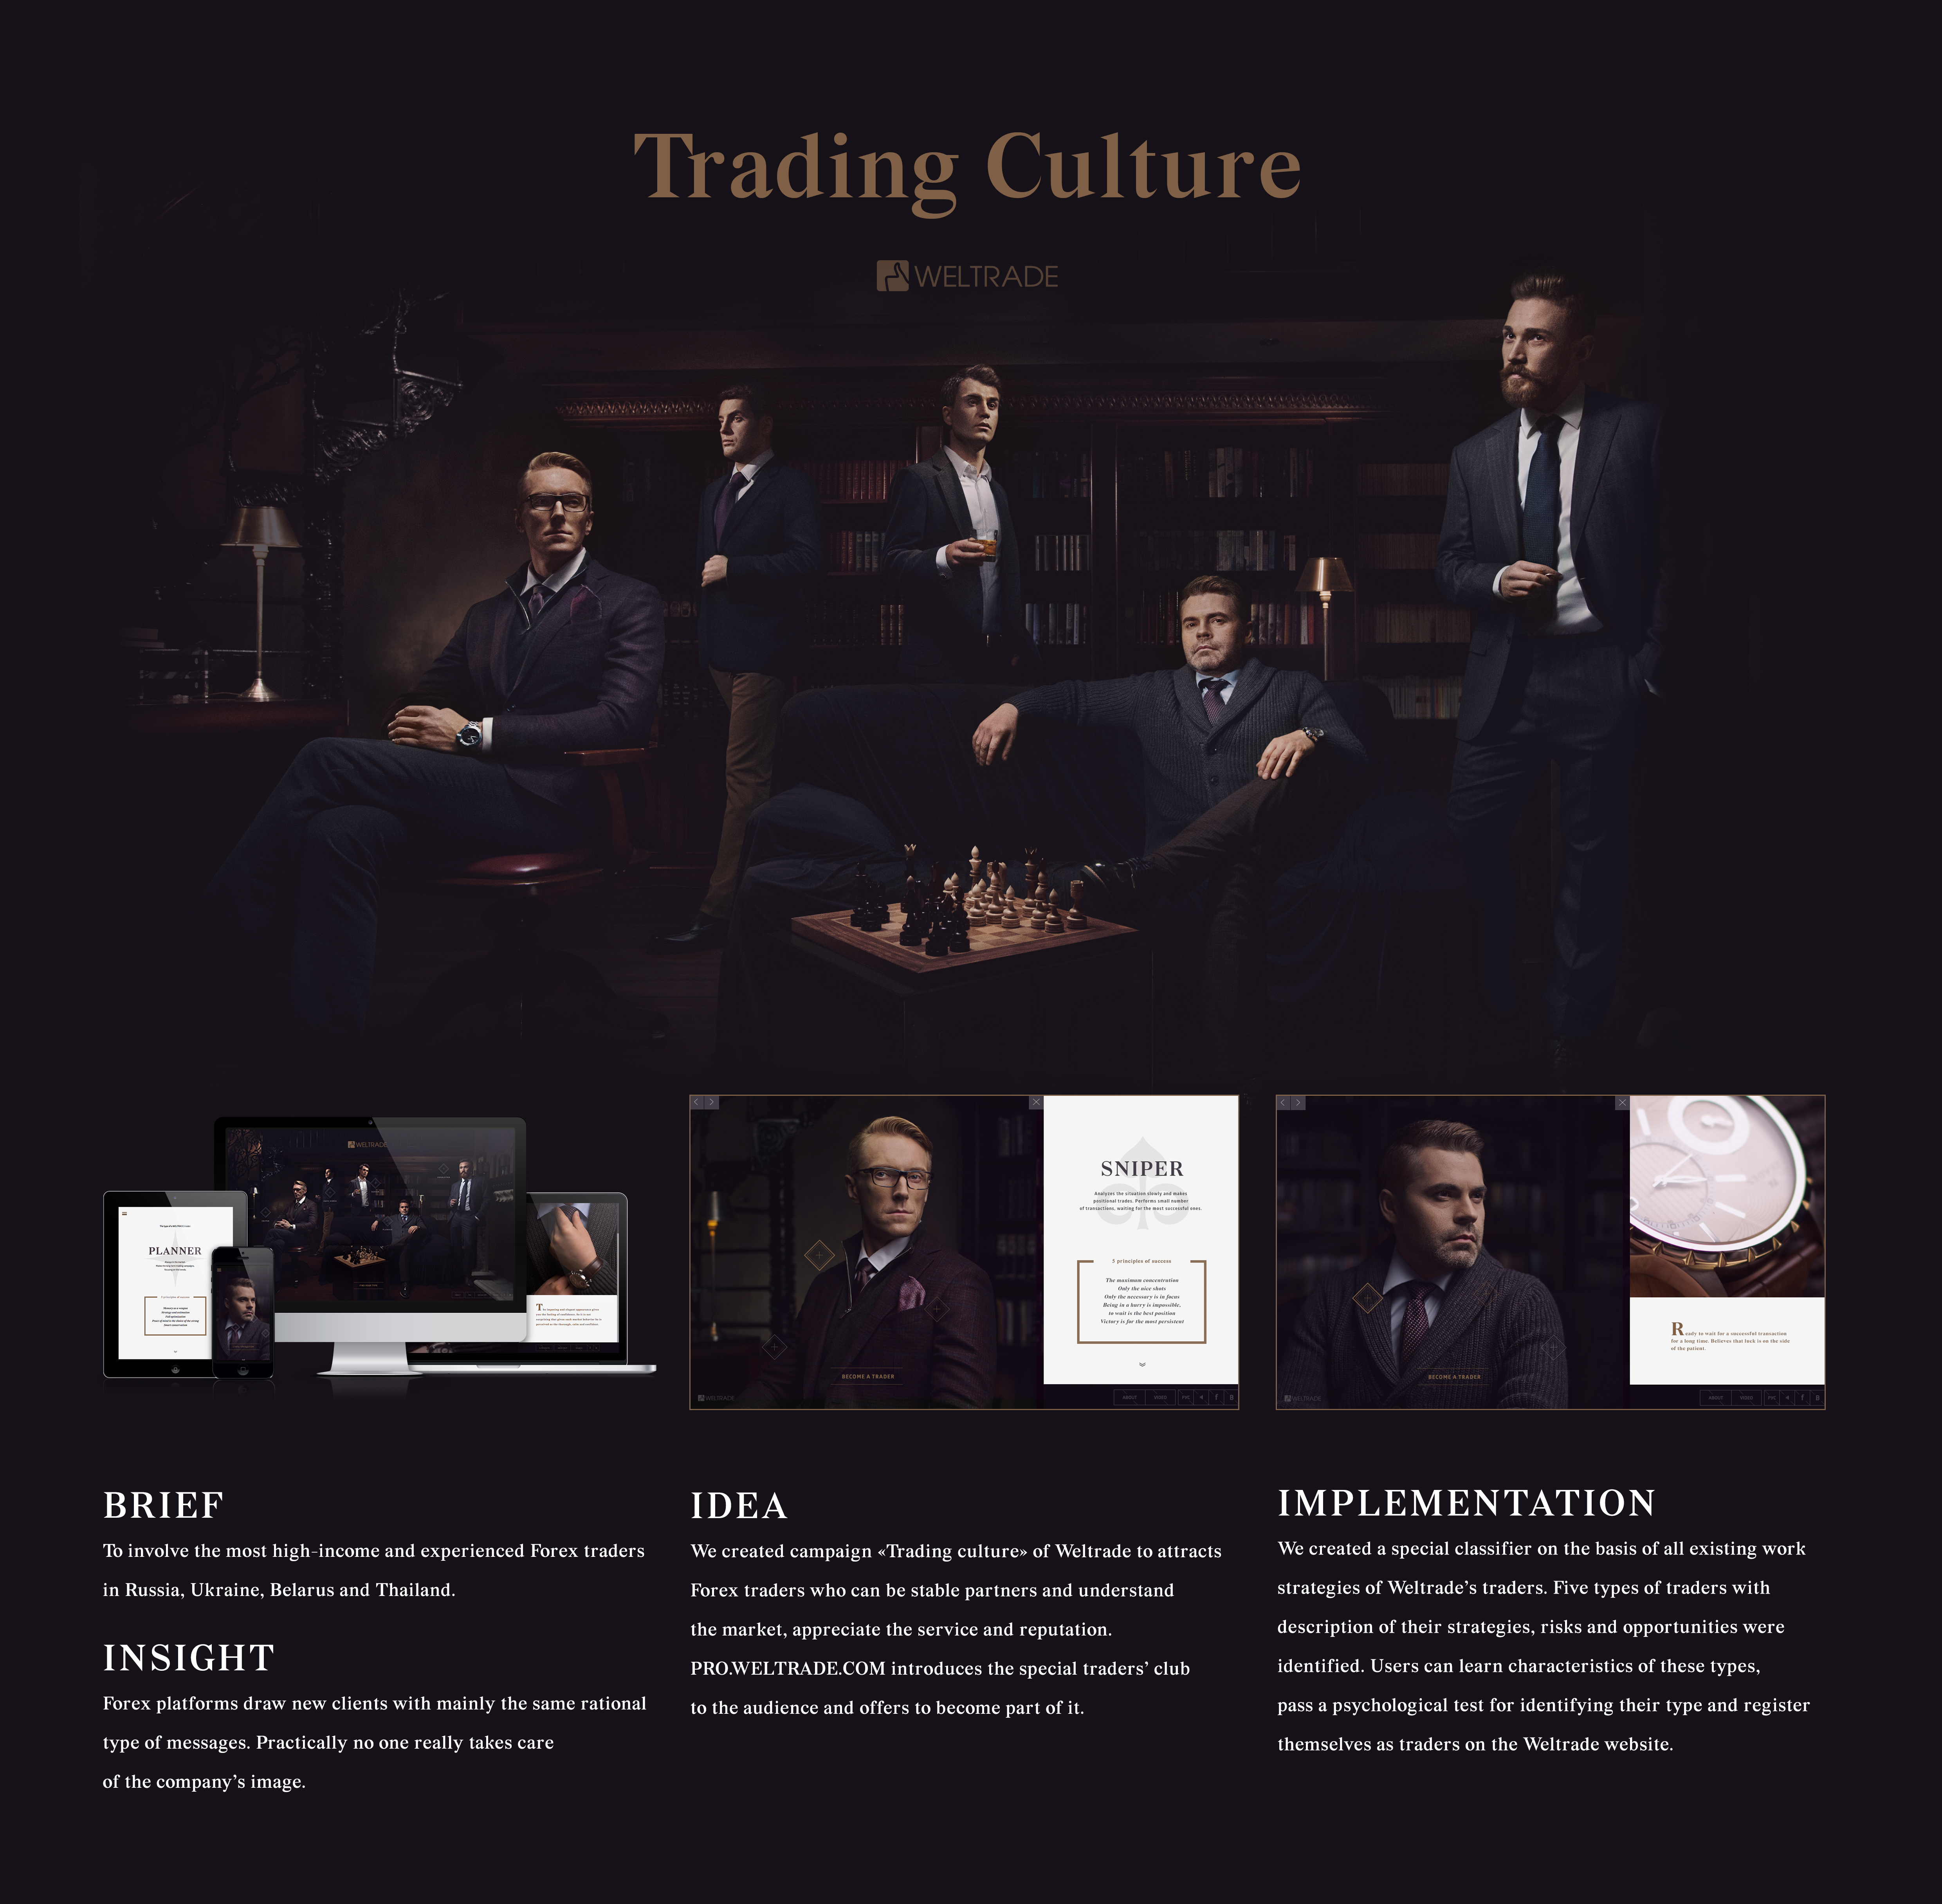 Trading culture